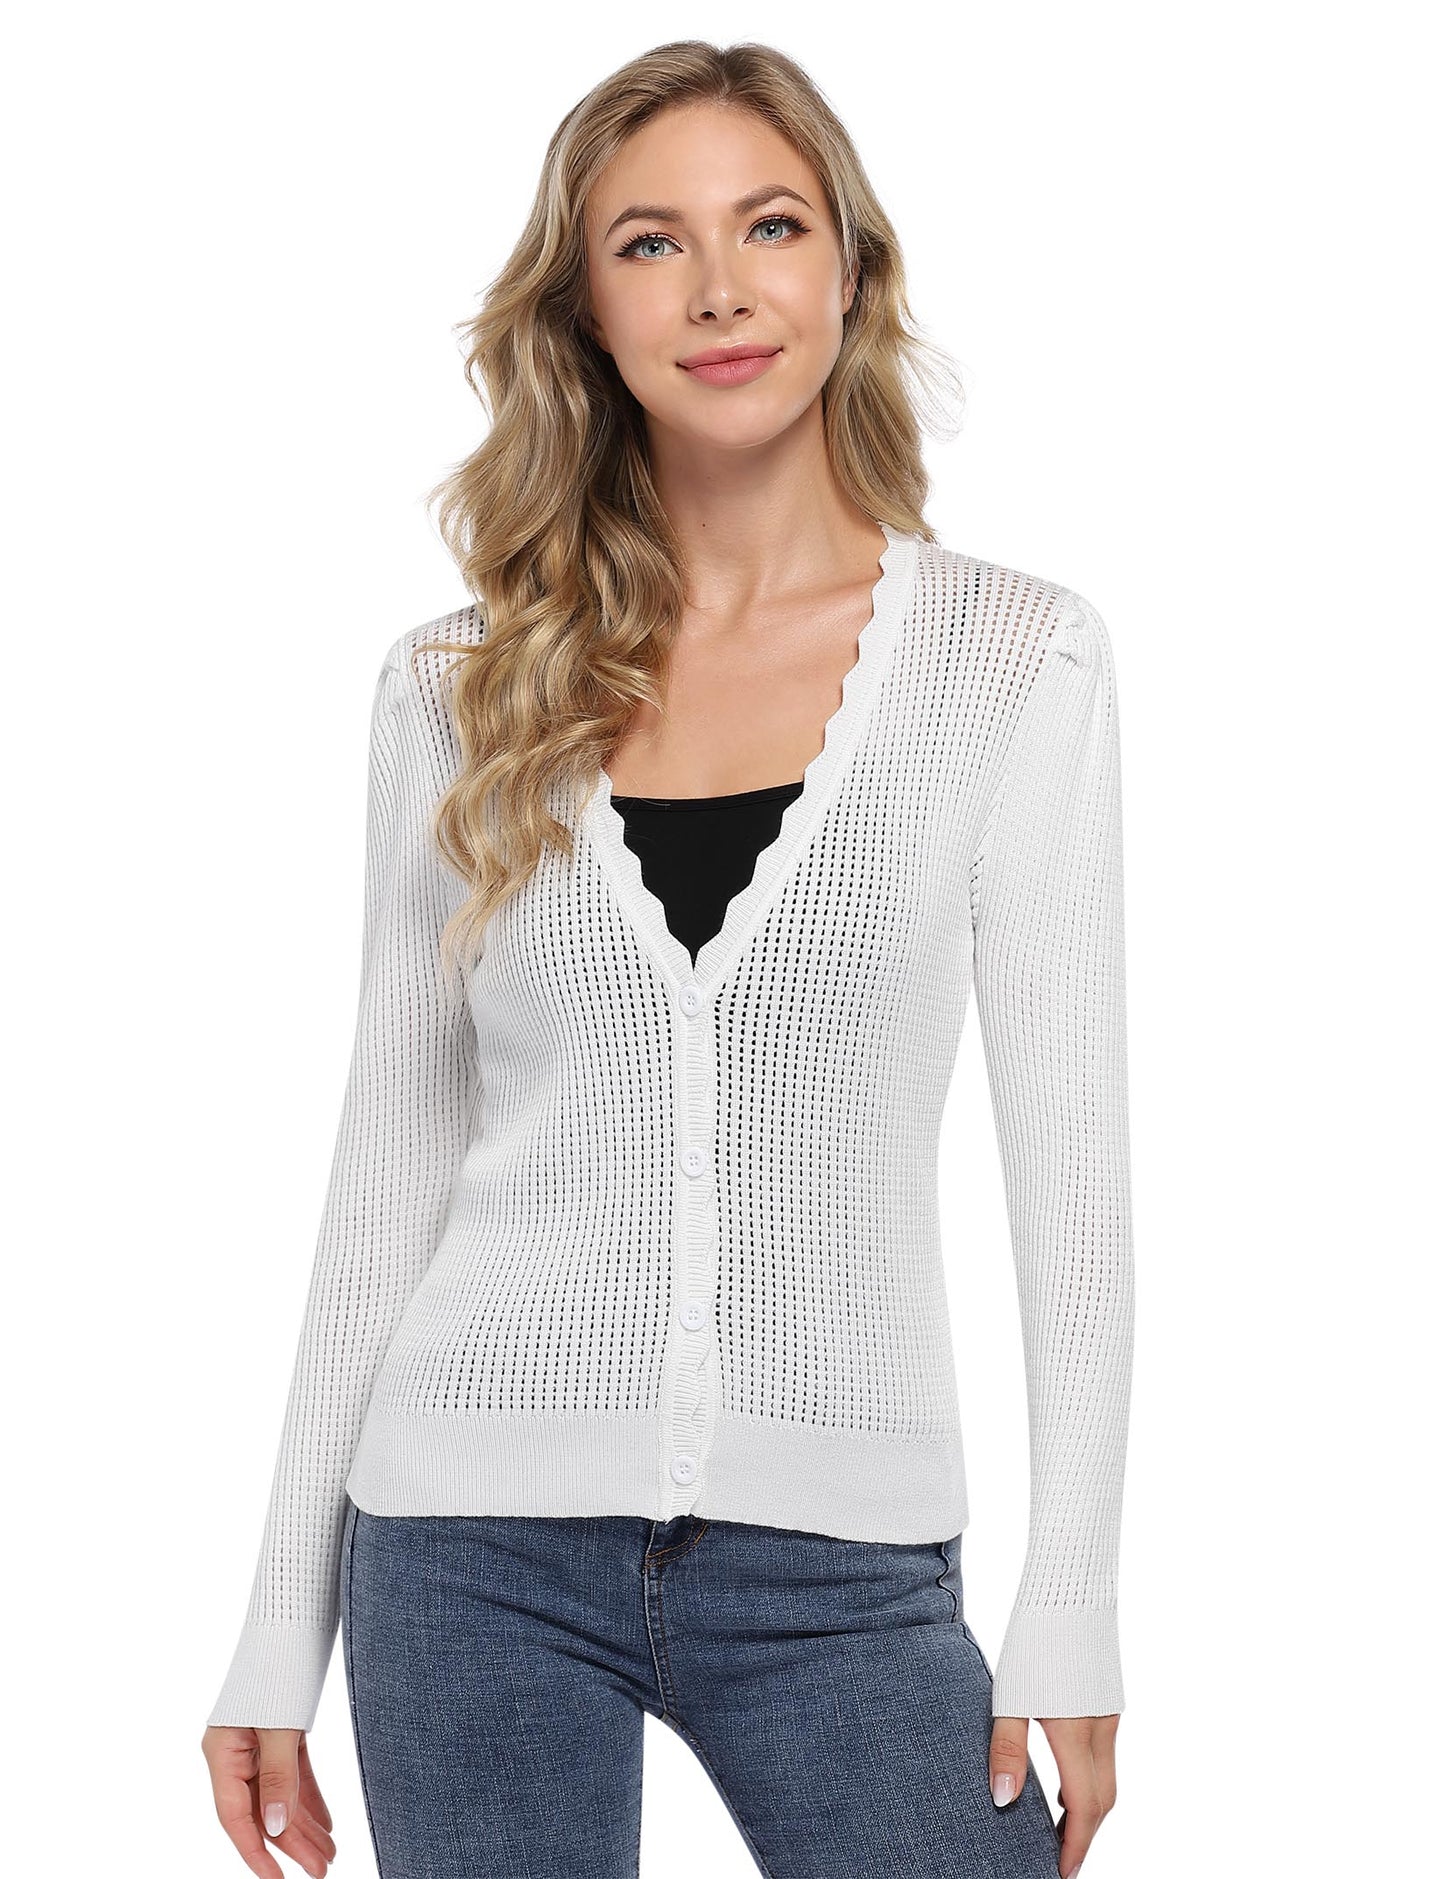 YESFASHION Women's Cropped Button Cardigan Sweaters